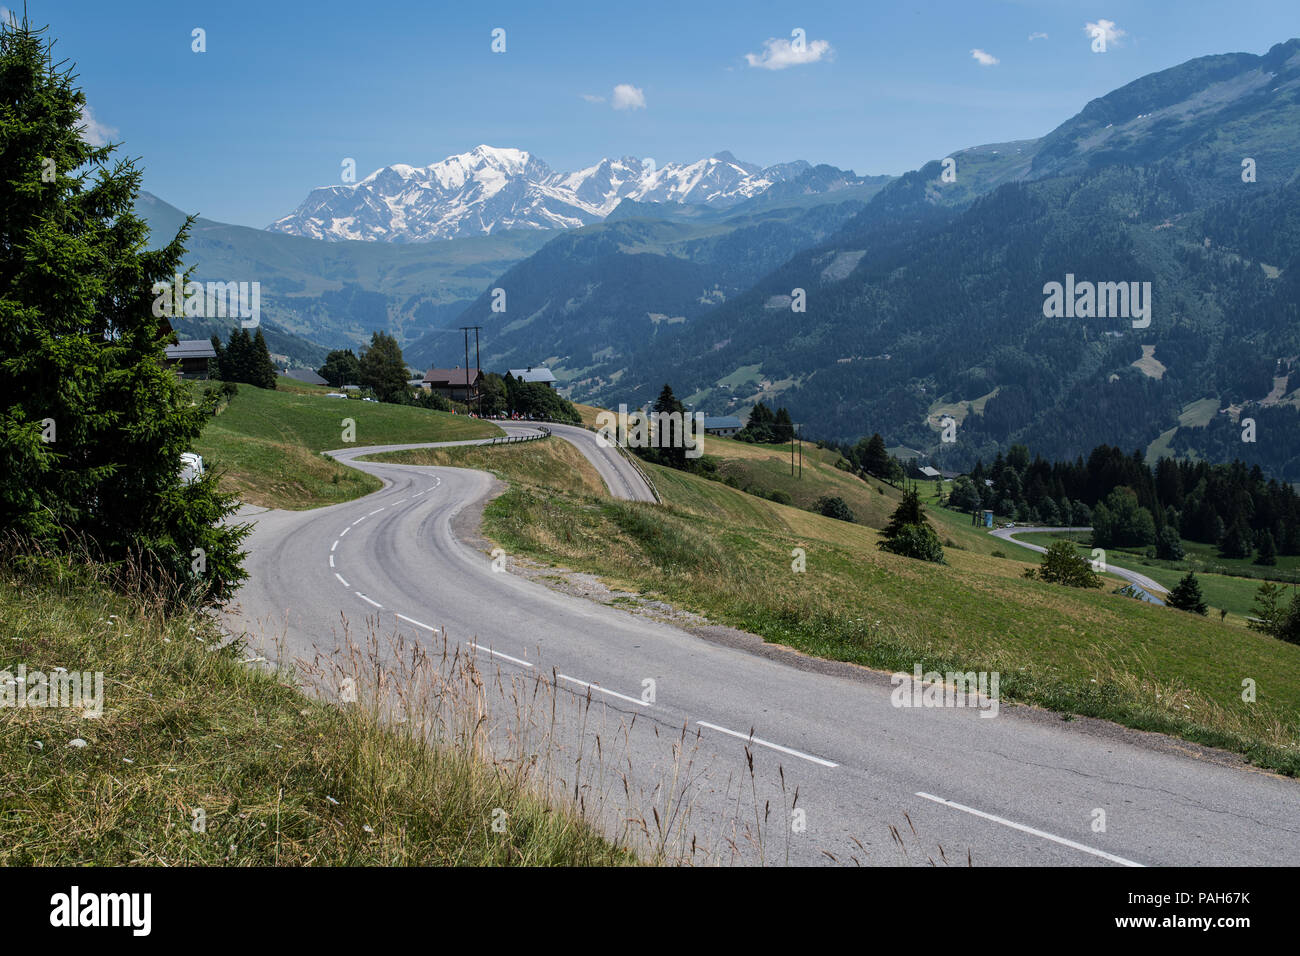 Landscape in the french alps near Alberville. Stock Photo